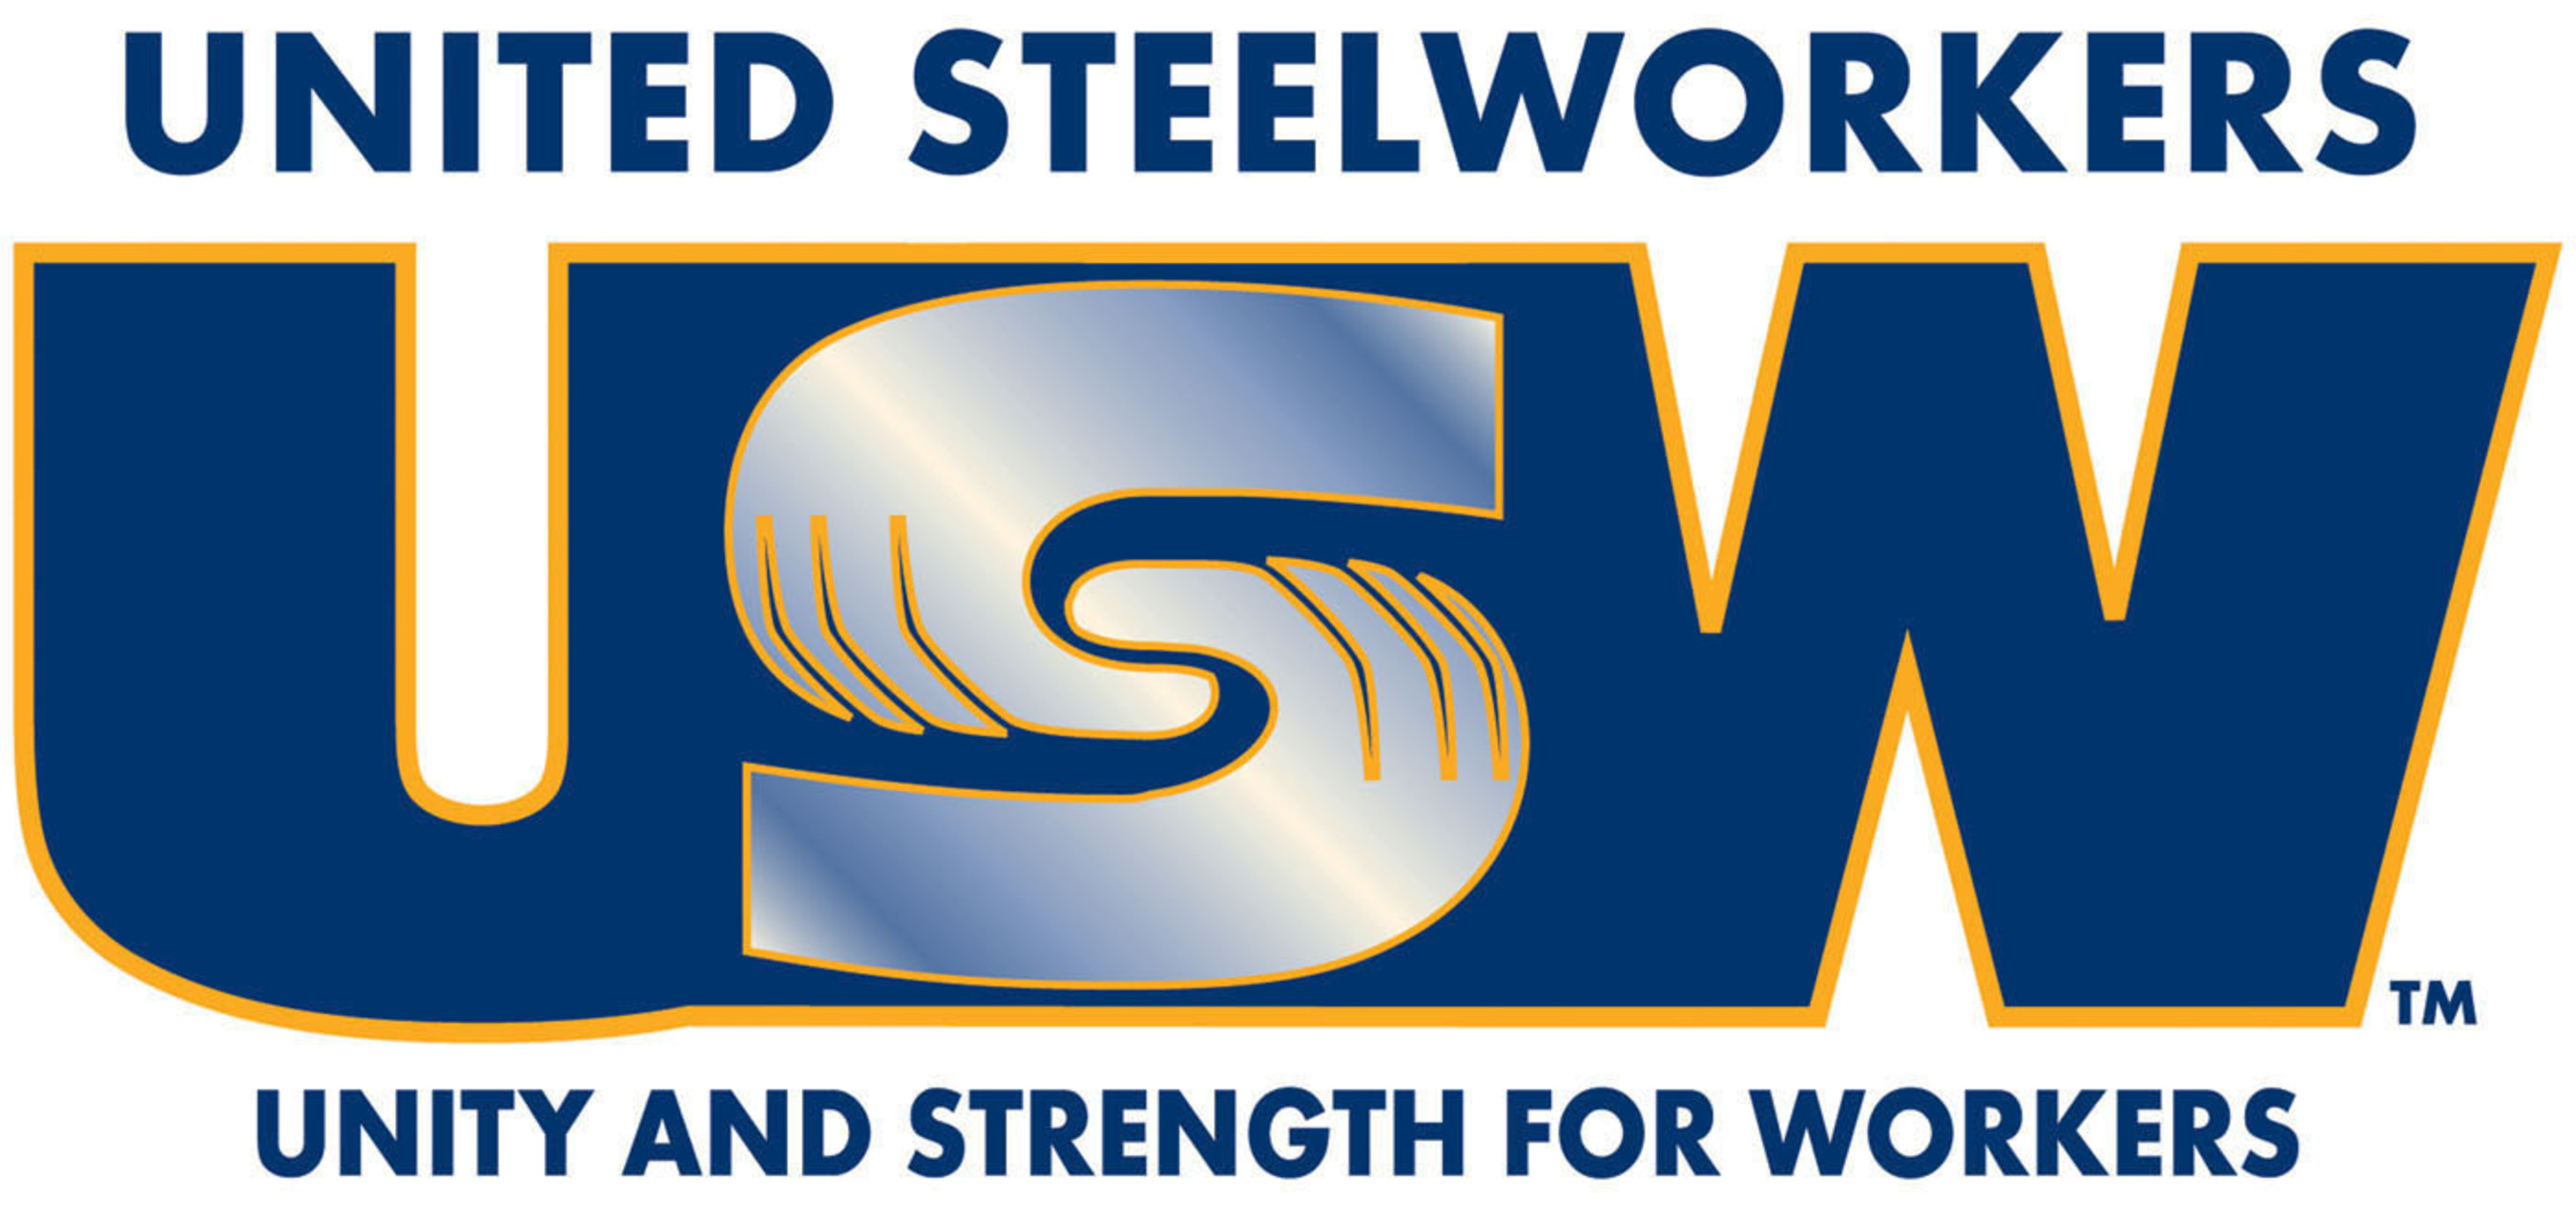 United Steelworkers Union (USW)